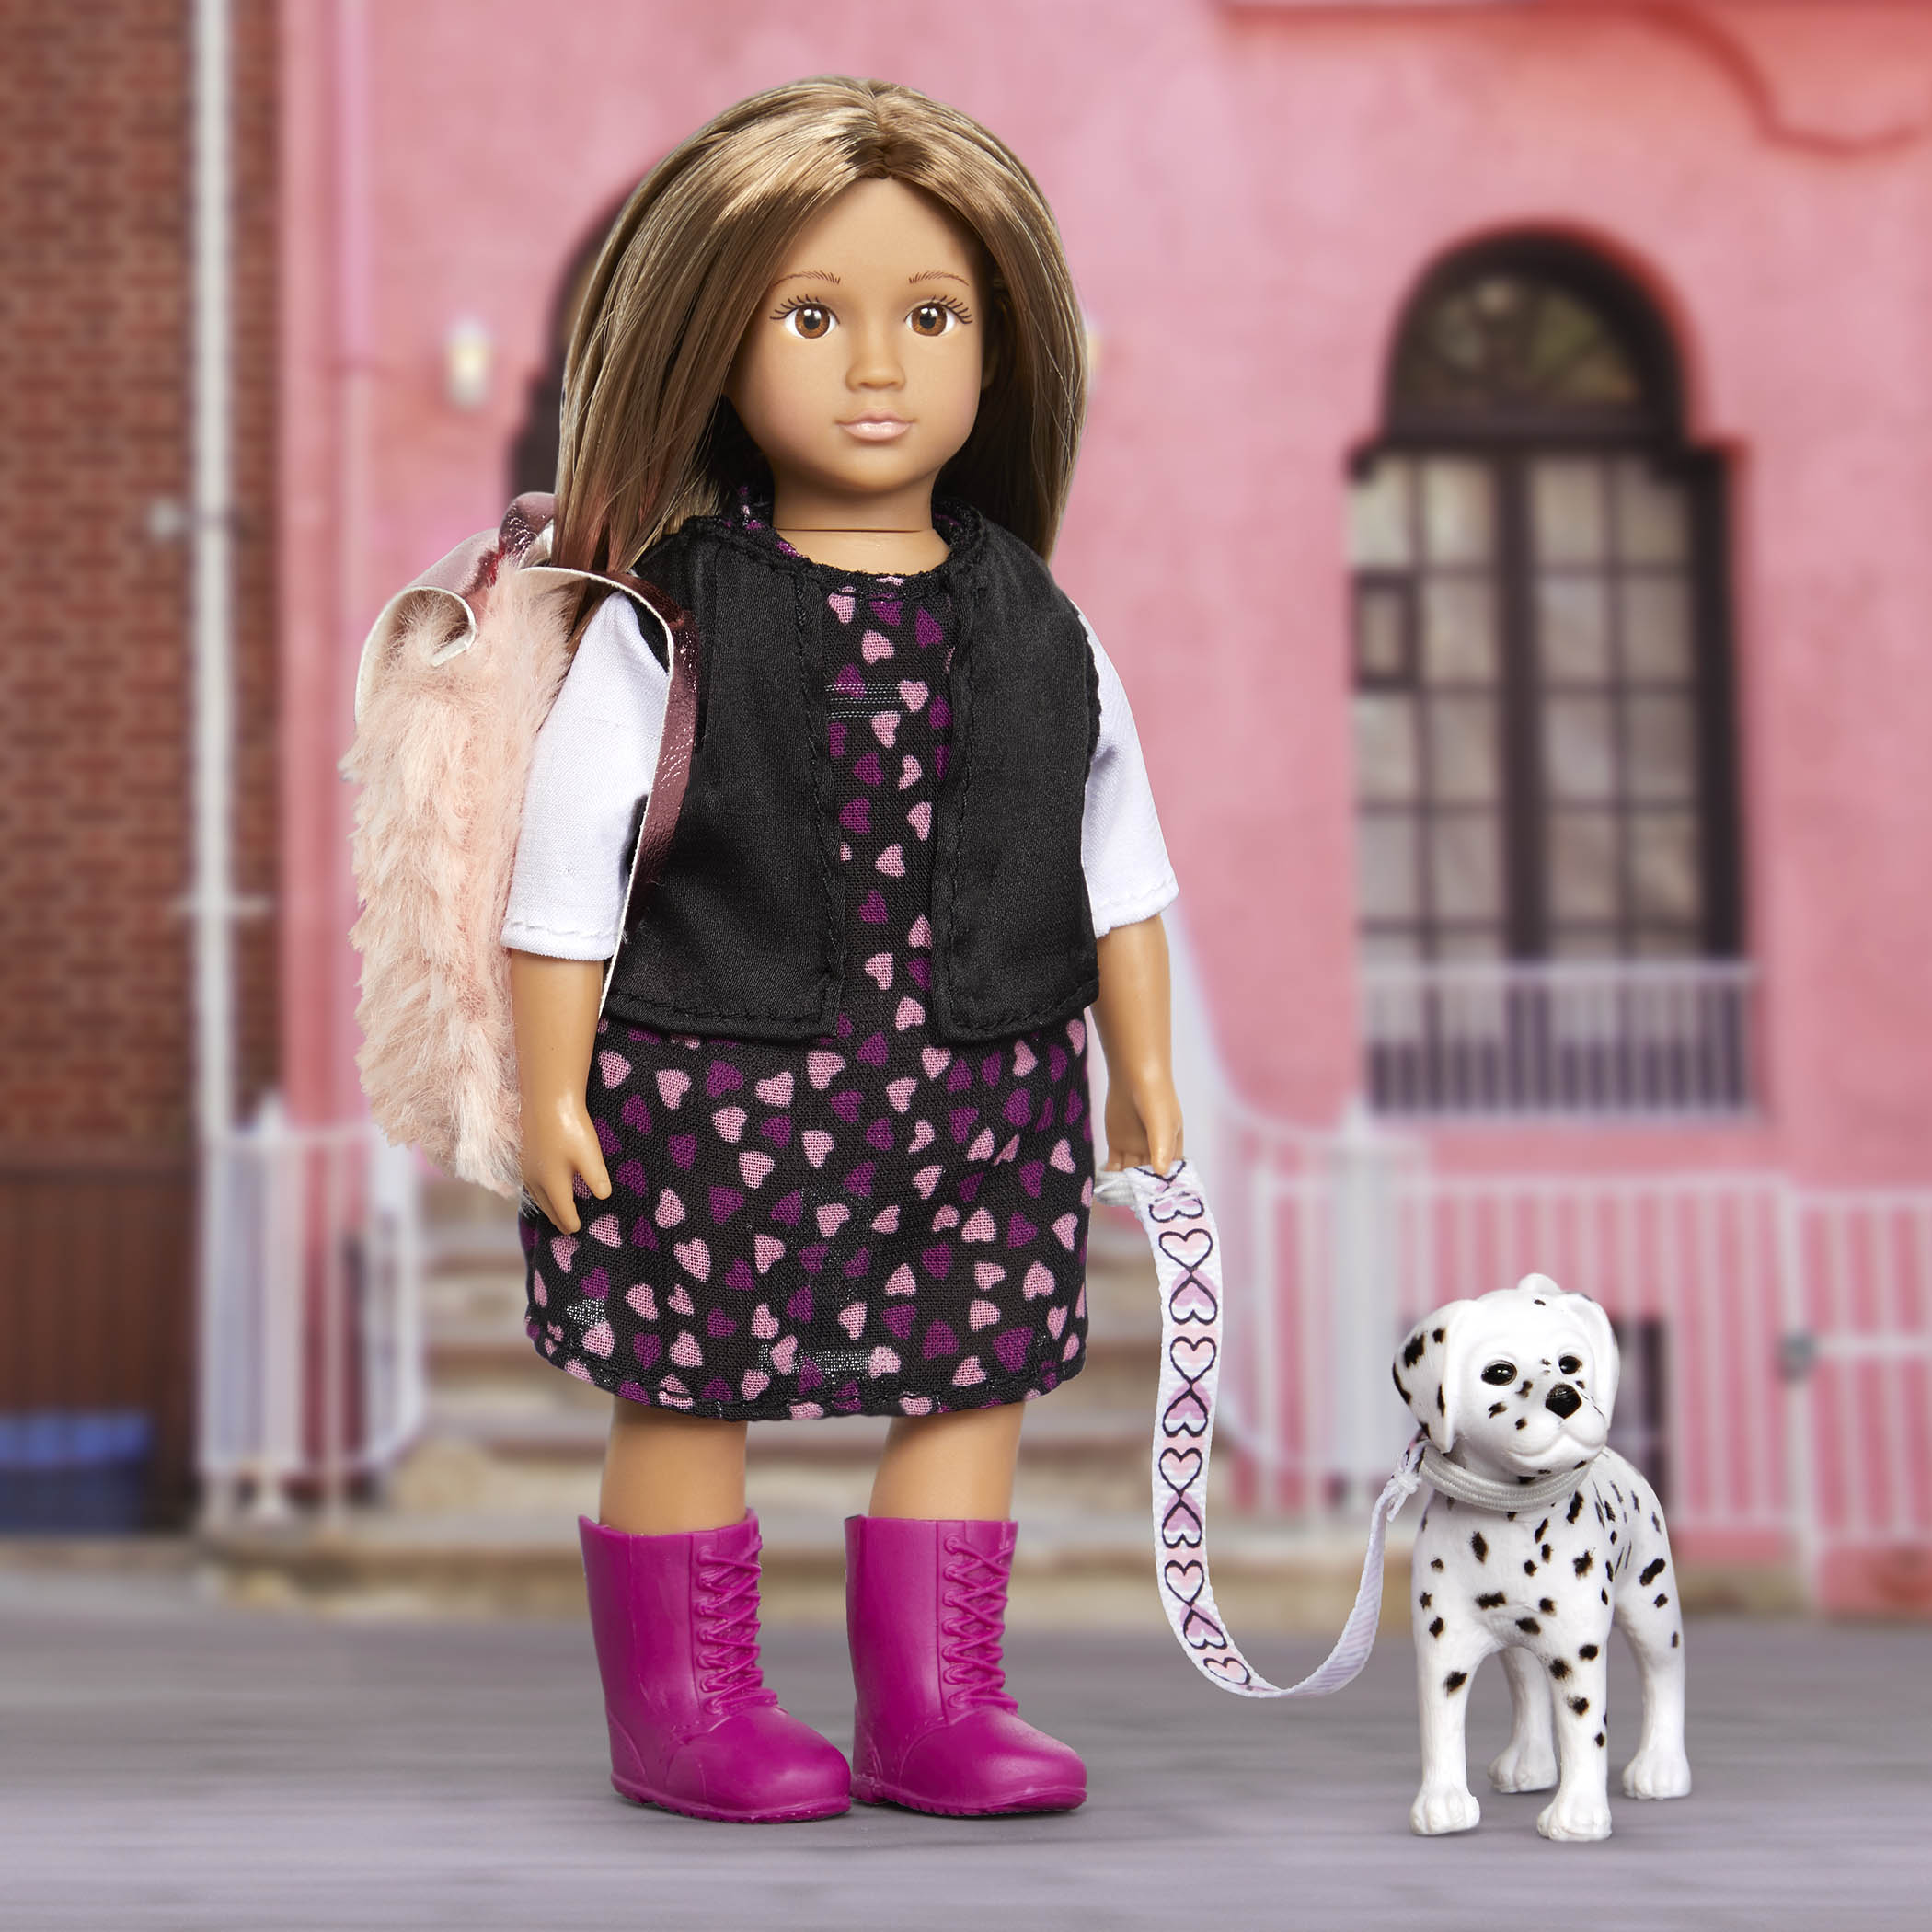 Lori 6" DOLL by Our Generation GIA Doll & GUNNER her Dalmatian Pup